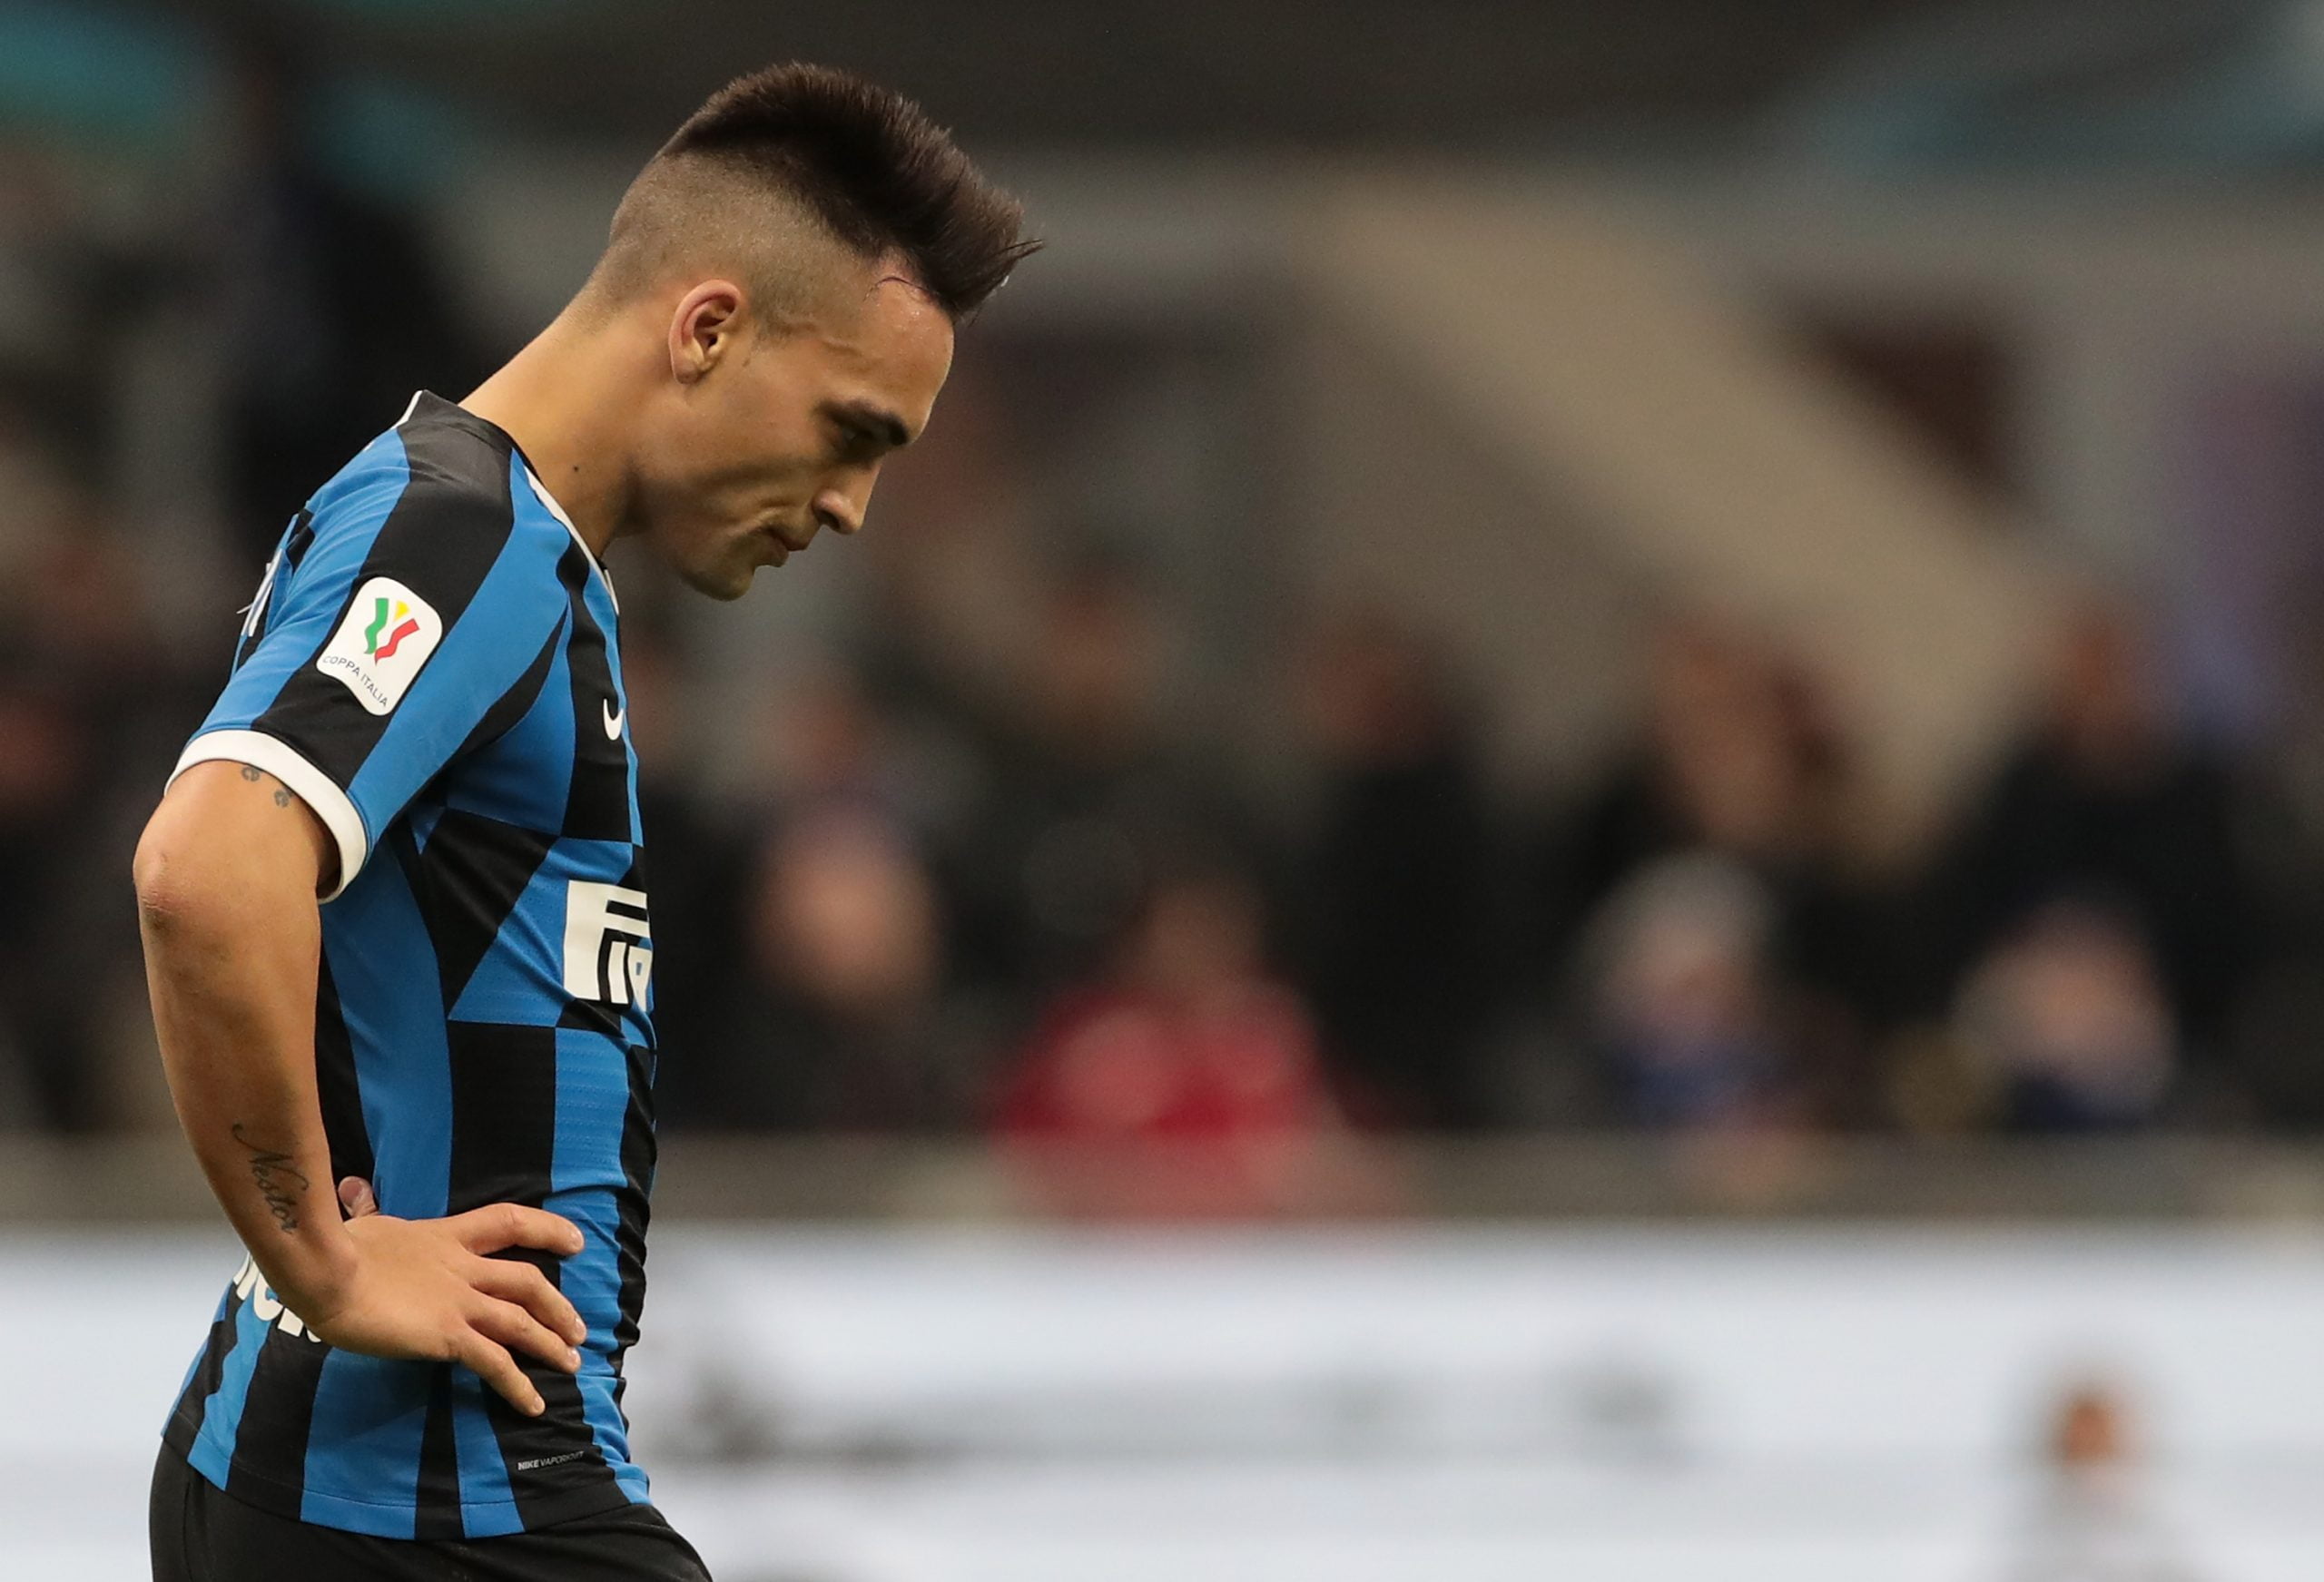 MILAN, ITALY - FEBRUARY 12:  Lautaro Martinez of FC Internazionale looks dejected during the Coppa Italia Semi Final match between FC Internazionale and SSC Napoli at Stadio Giuseppe Meazza on February 12, 2020 in Milan, Italy.  (Photo by Emilio Andreoli/Getty Images)